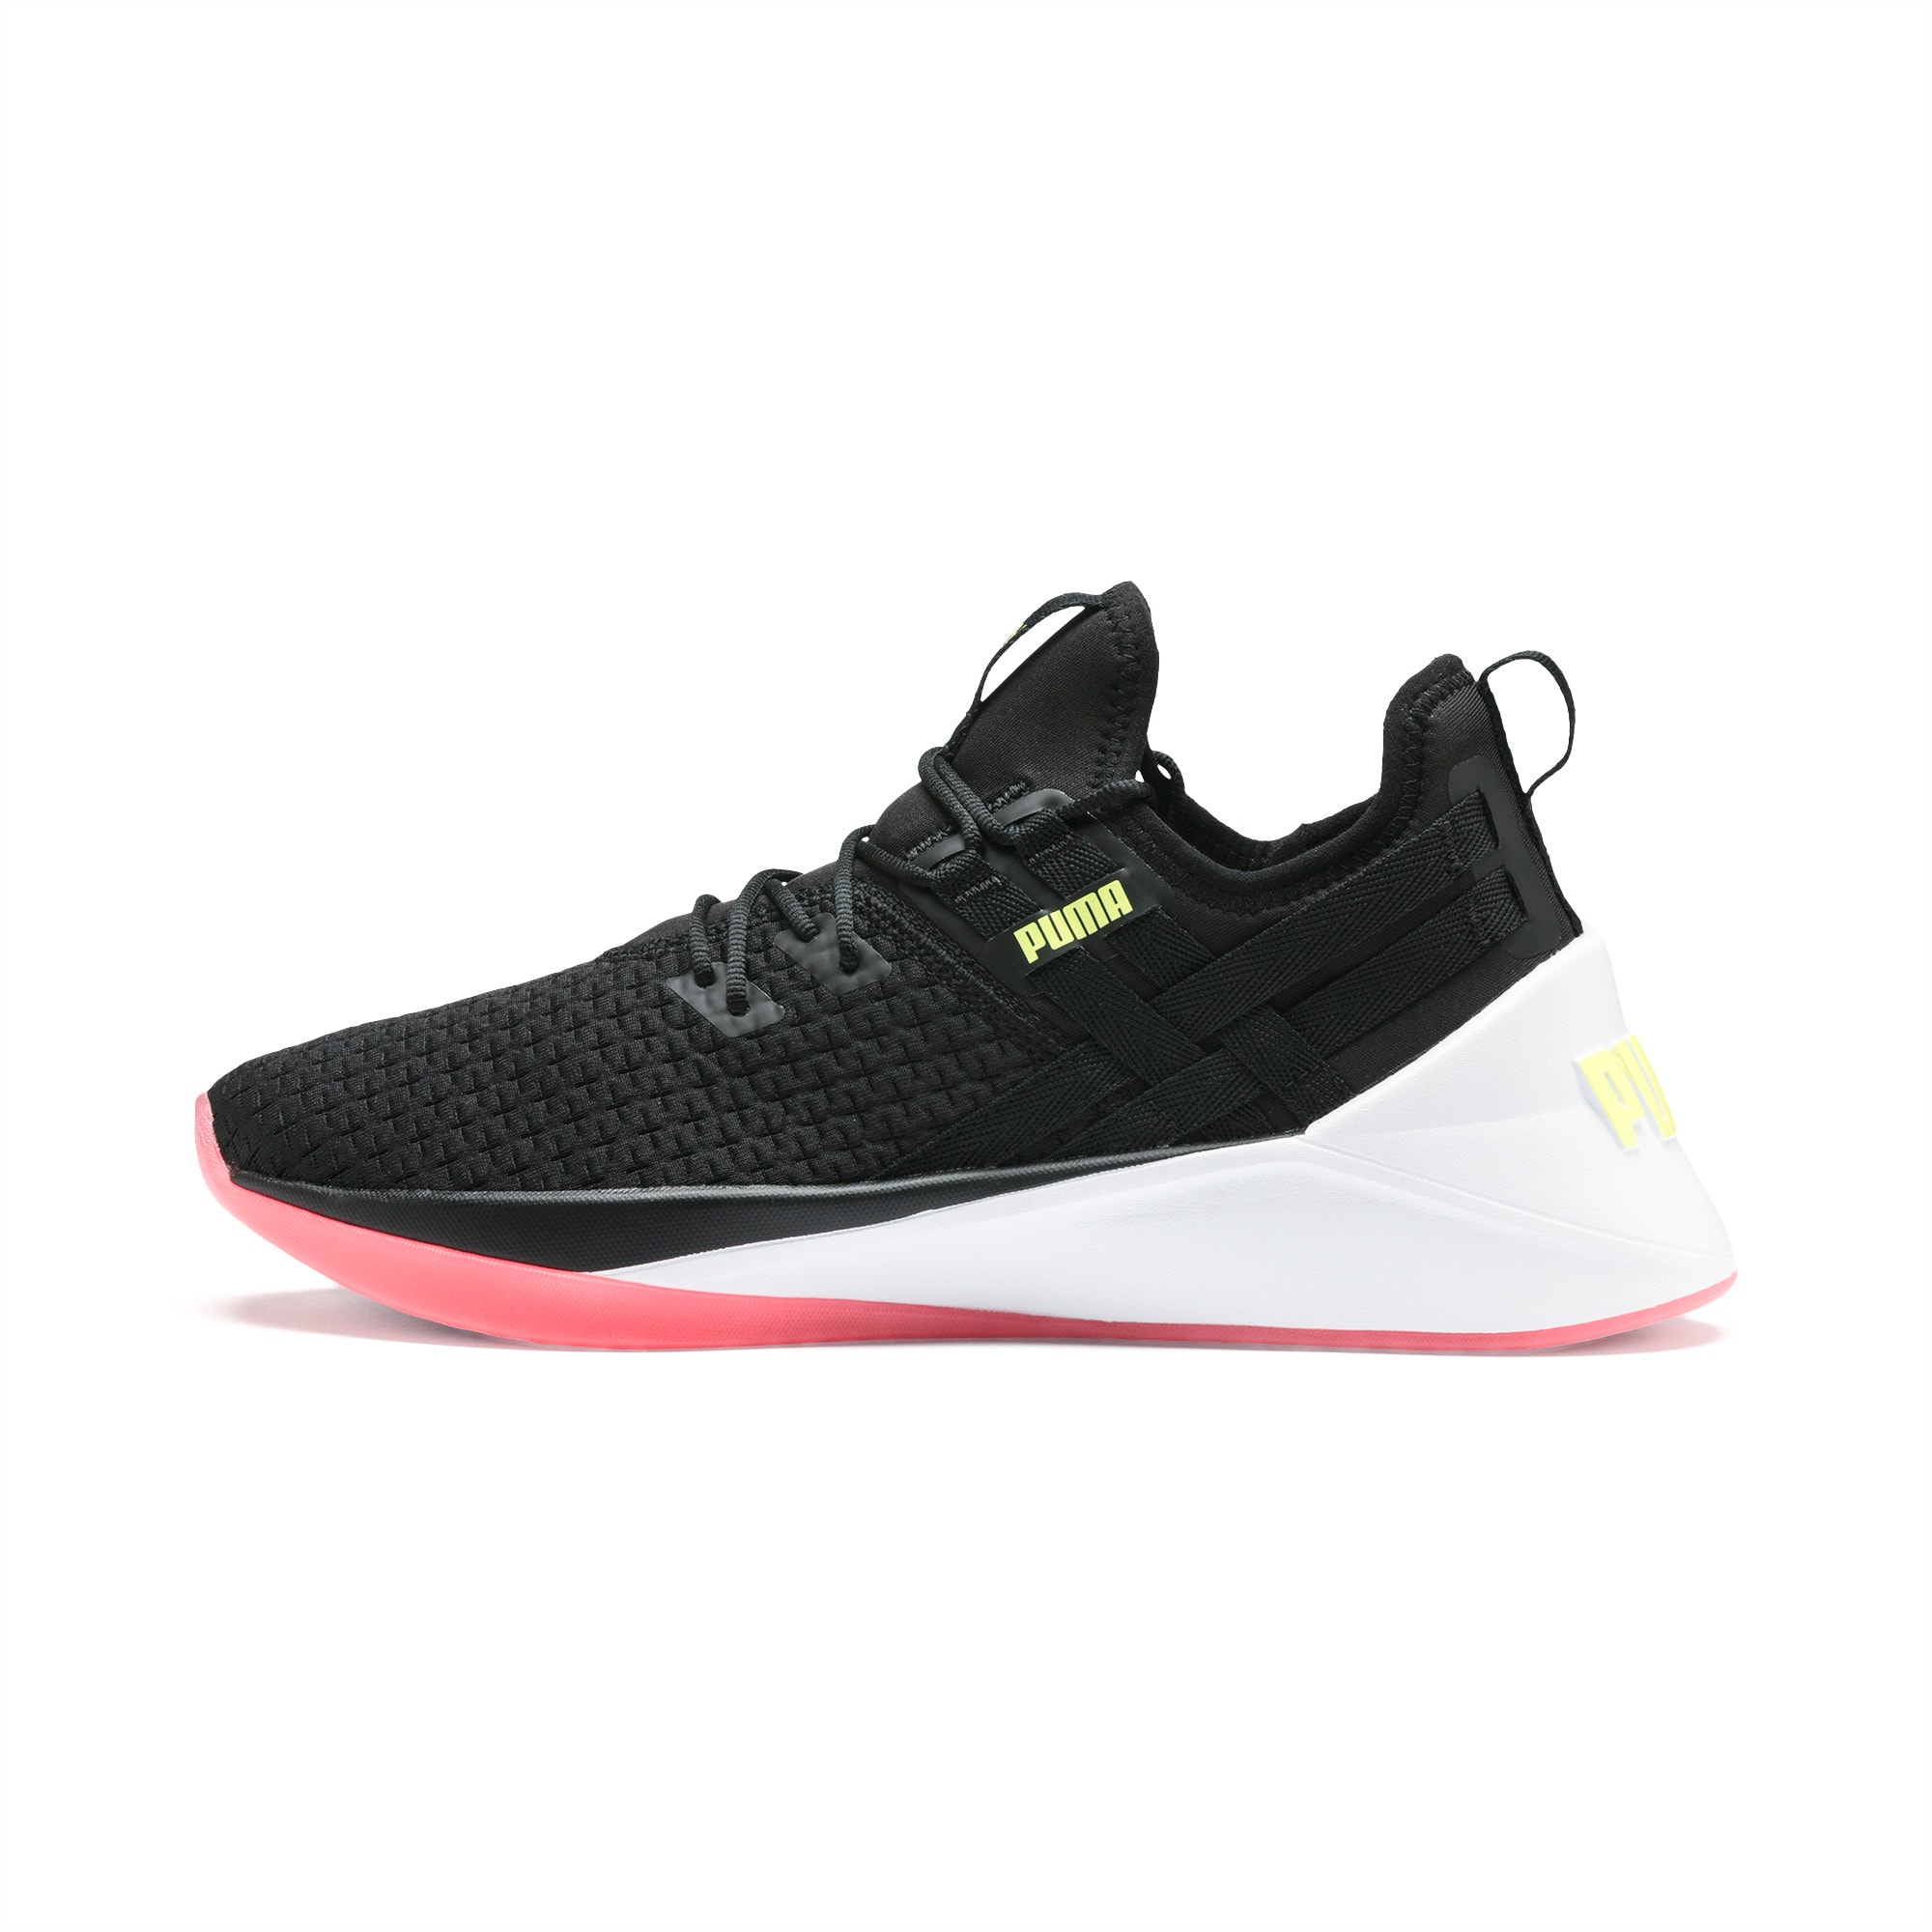 puma shoes for workout